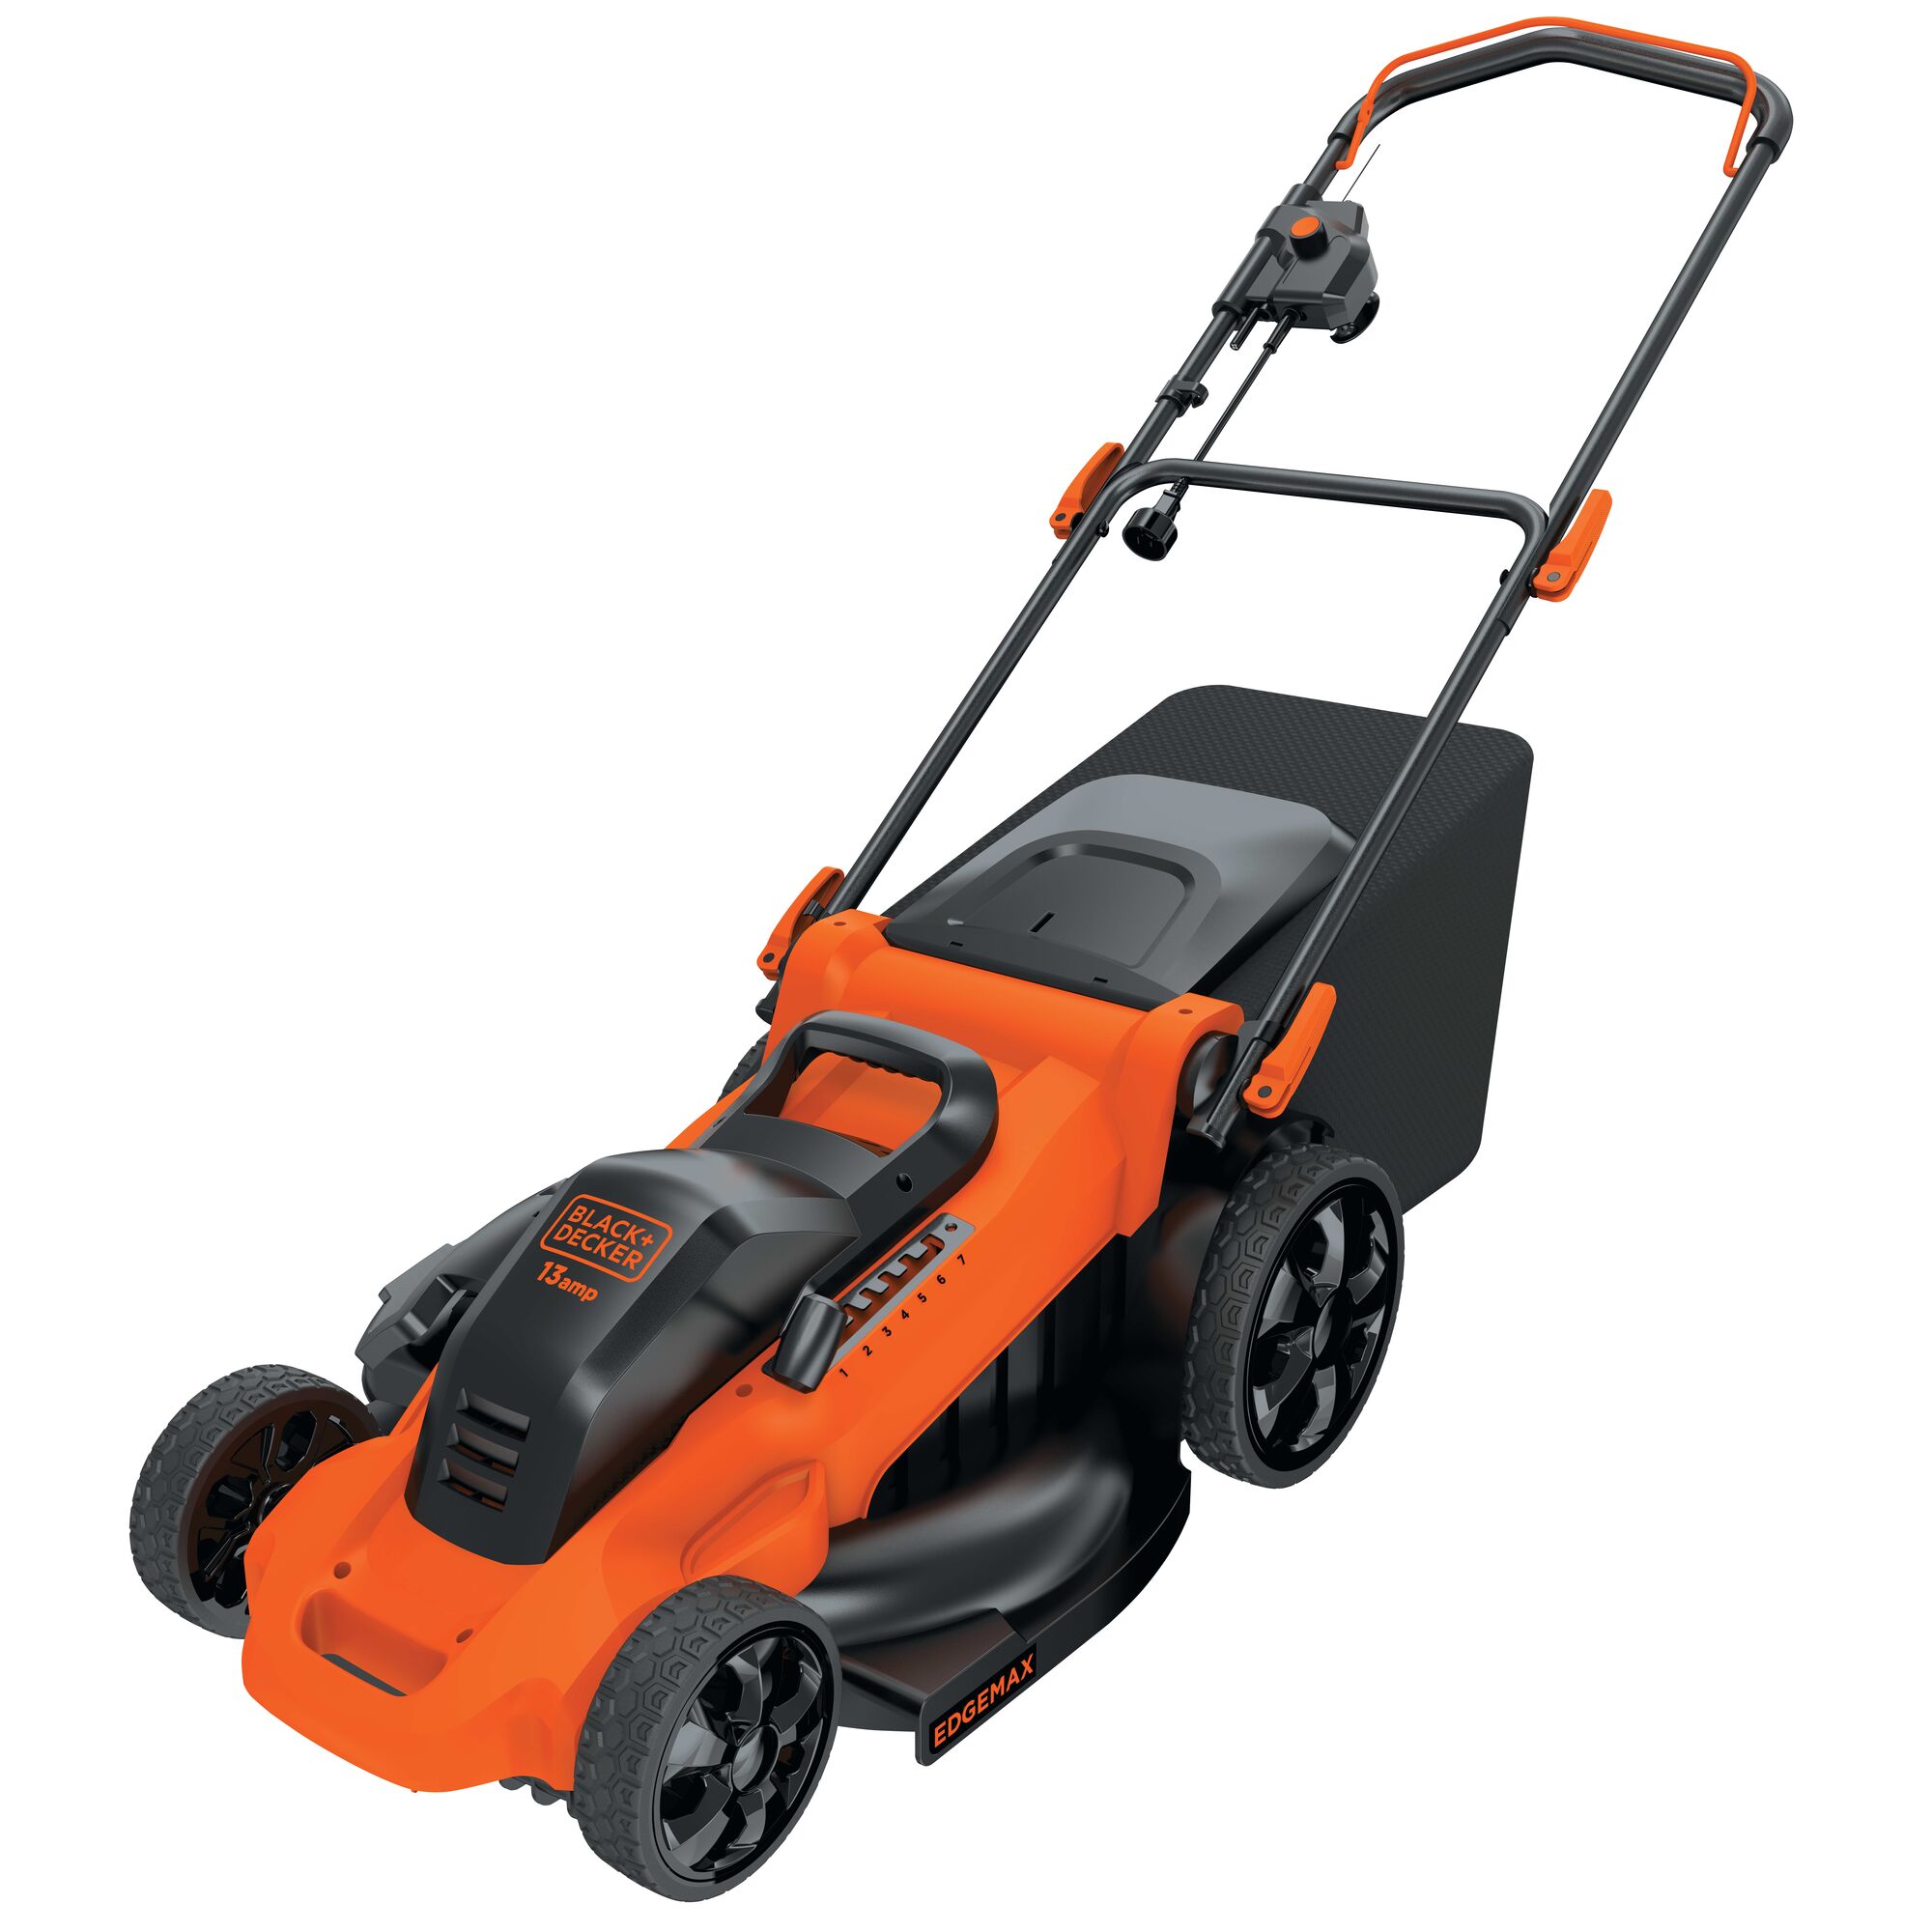 Corded Lawn Mower on white background.